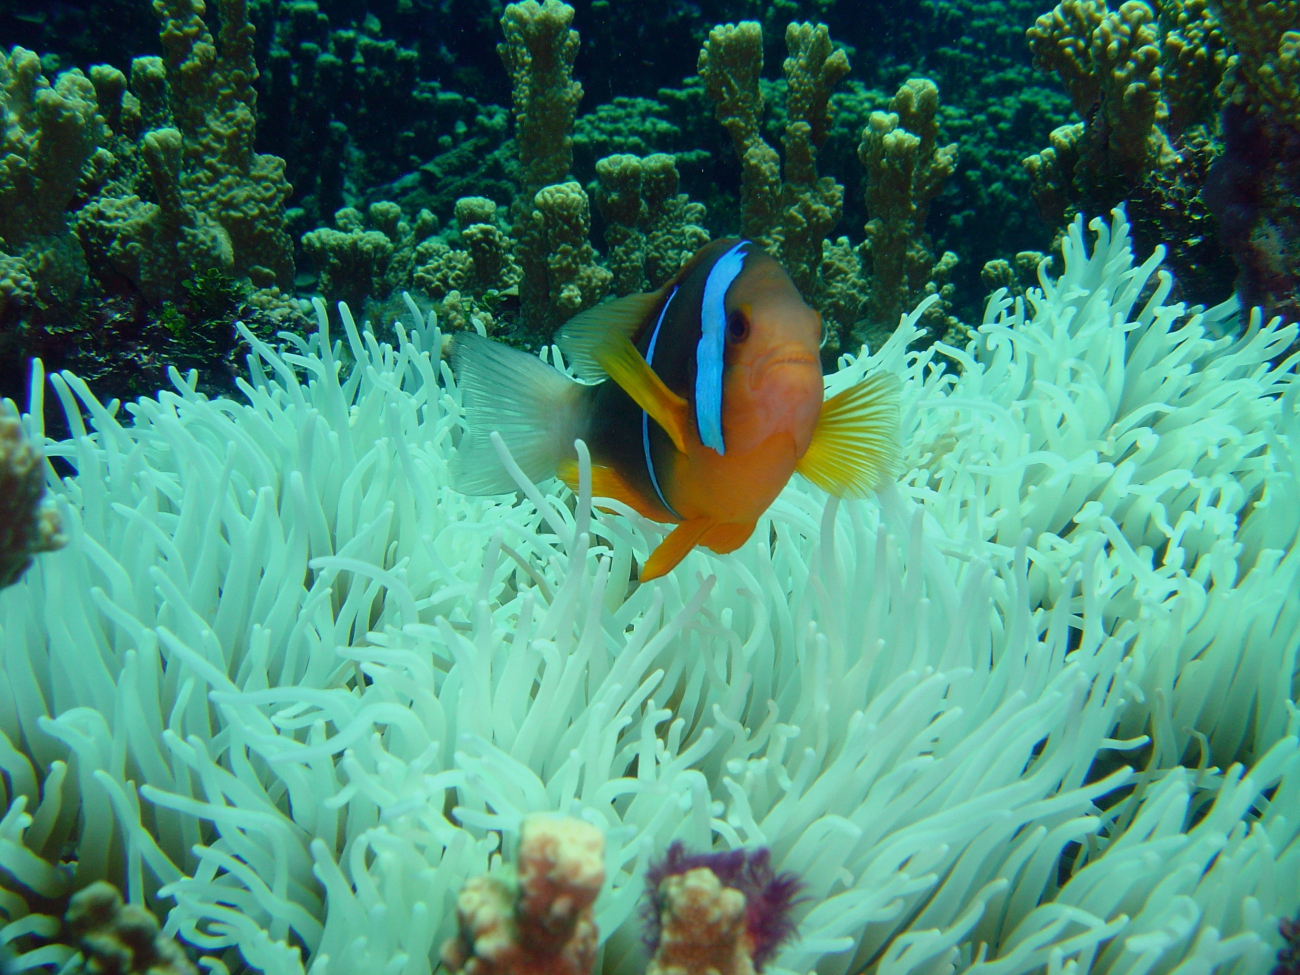 Sea anemone with orange-fin anemonefish (Amphiprion chrysopterus)